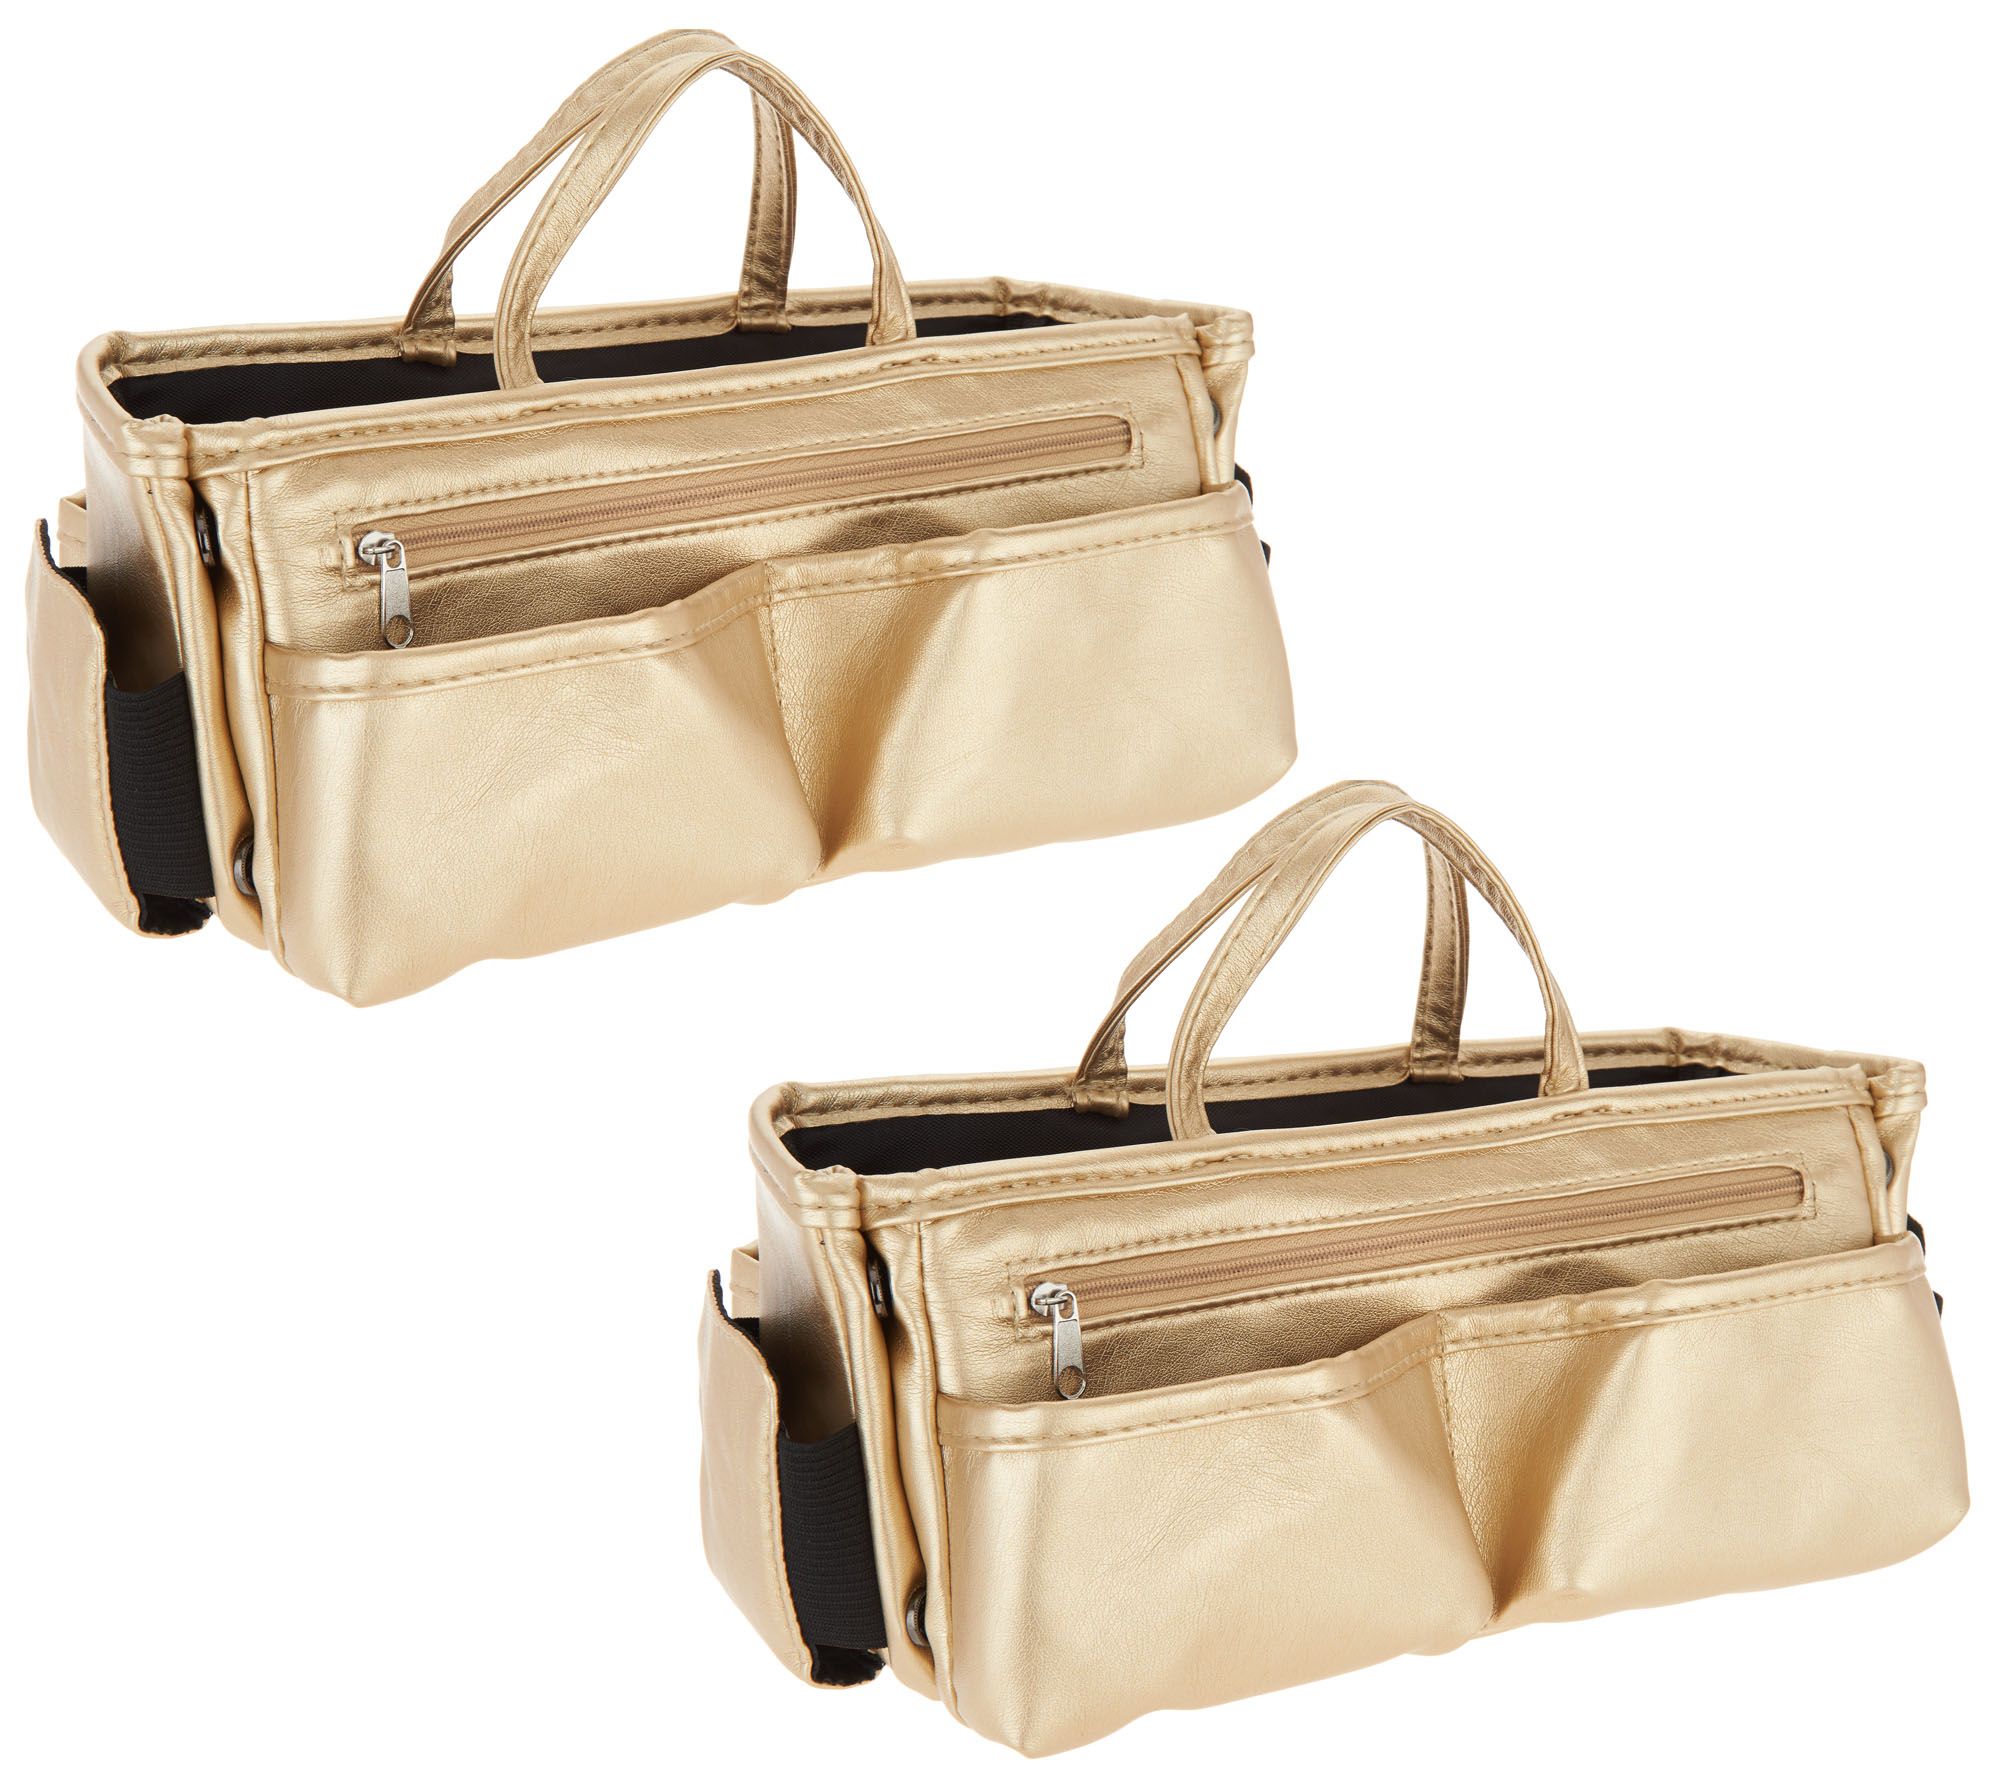 Set of 2 Ready Set Go Expandable Bag Organizers by Lori Greiner